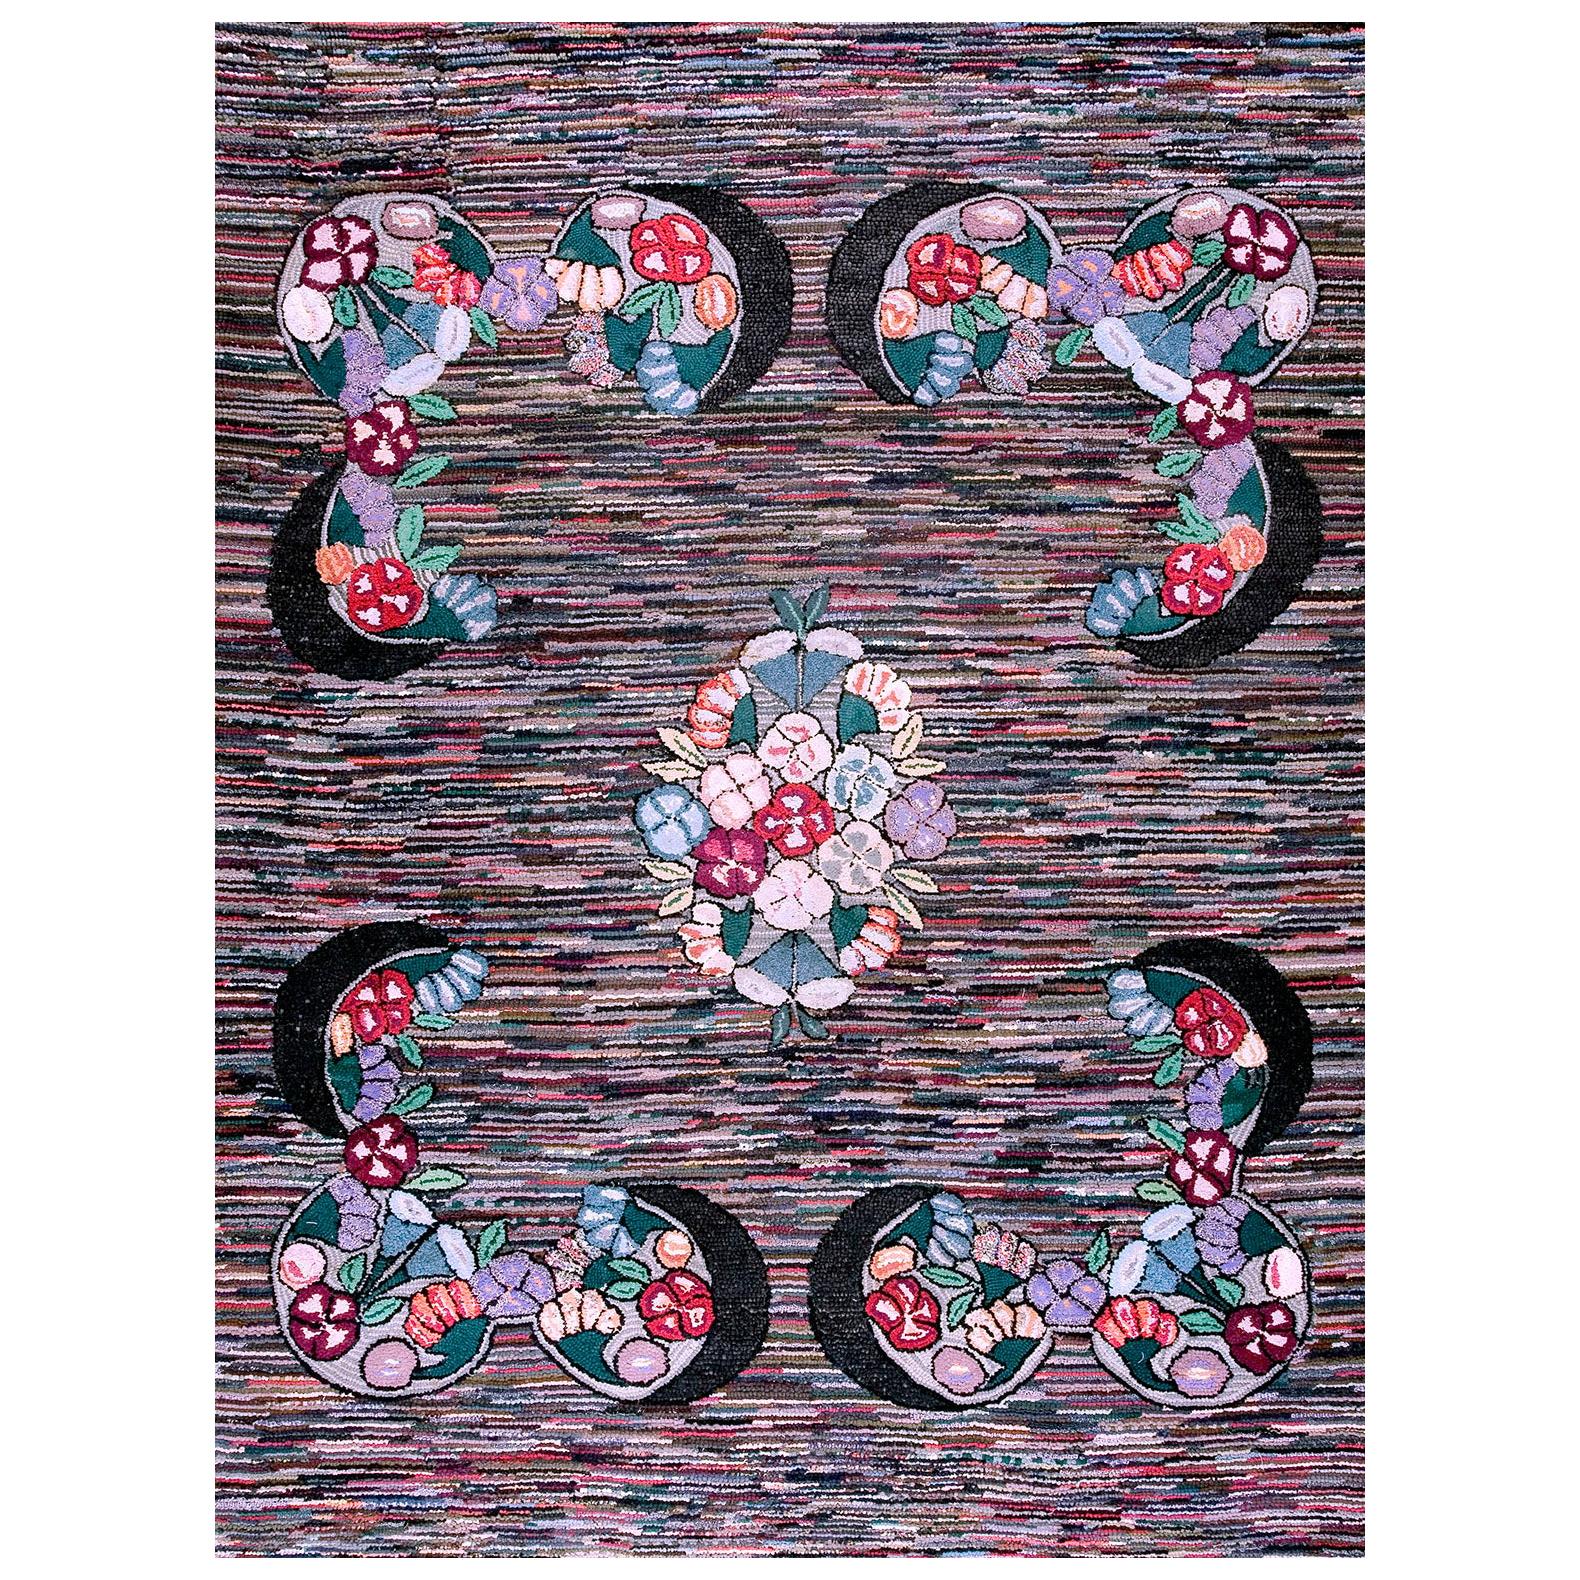 Antique American Hooked Rug 9' 1" x 12' 3" For Sale